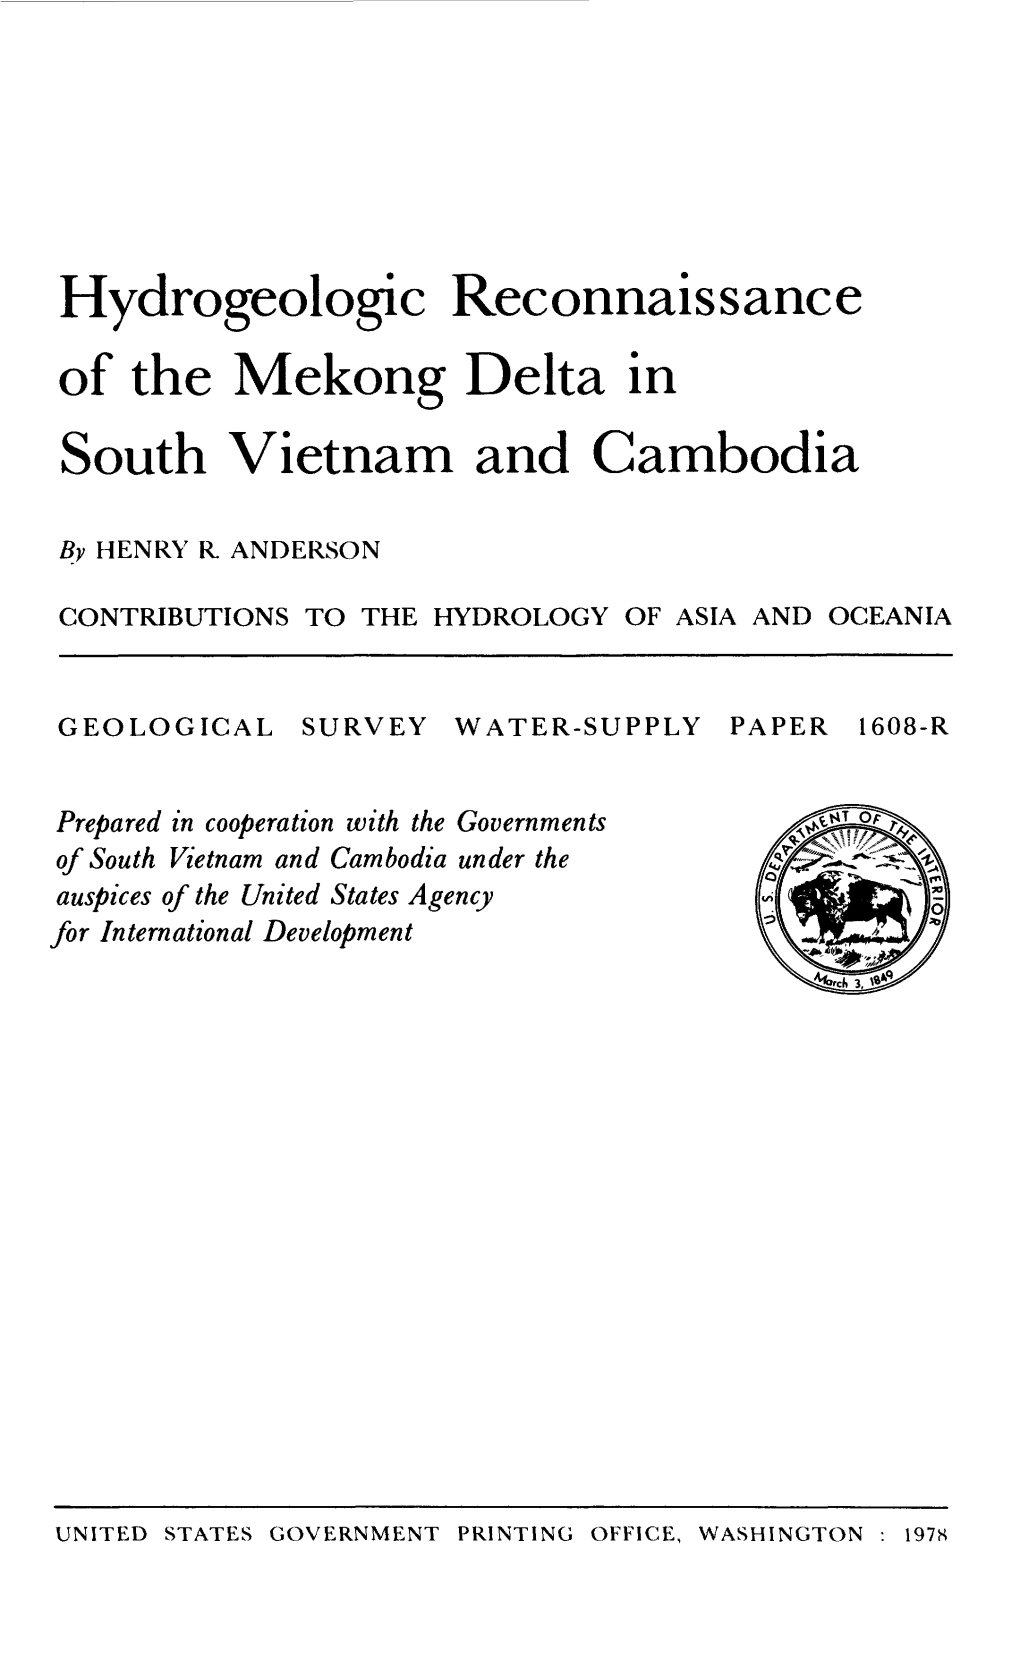 Hydrogeologic Reconnaissance of the Mekong Delta in South Vietnam and Cambodia